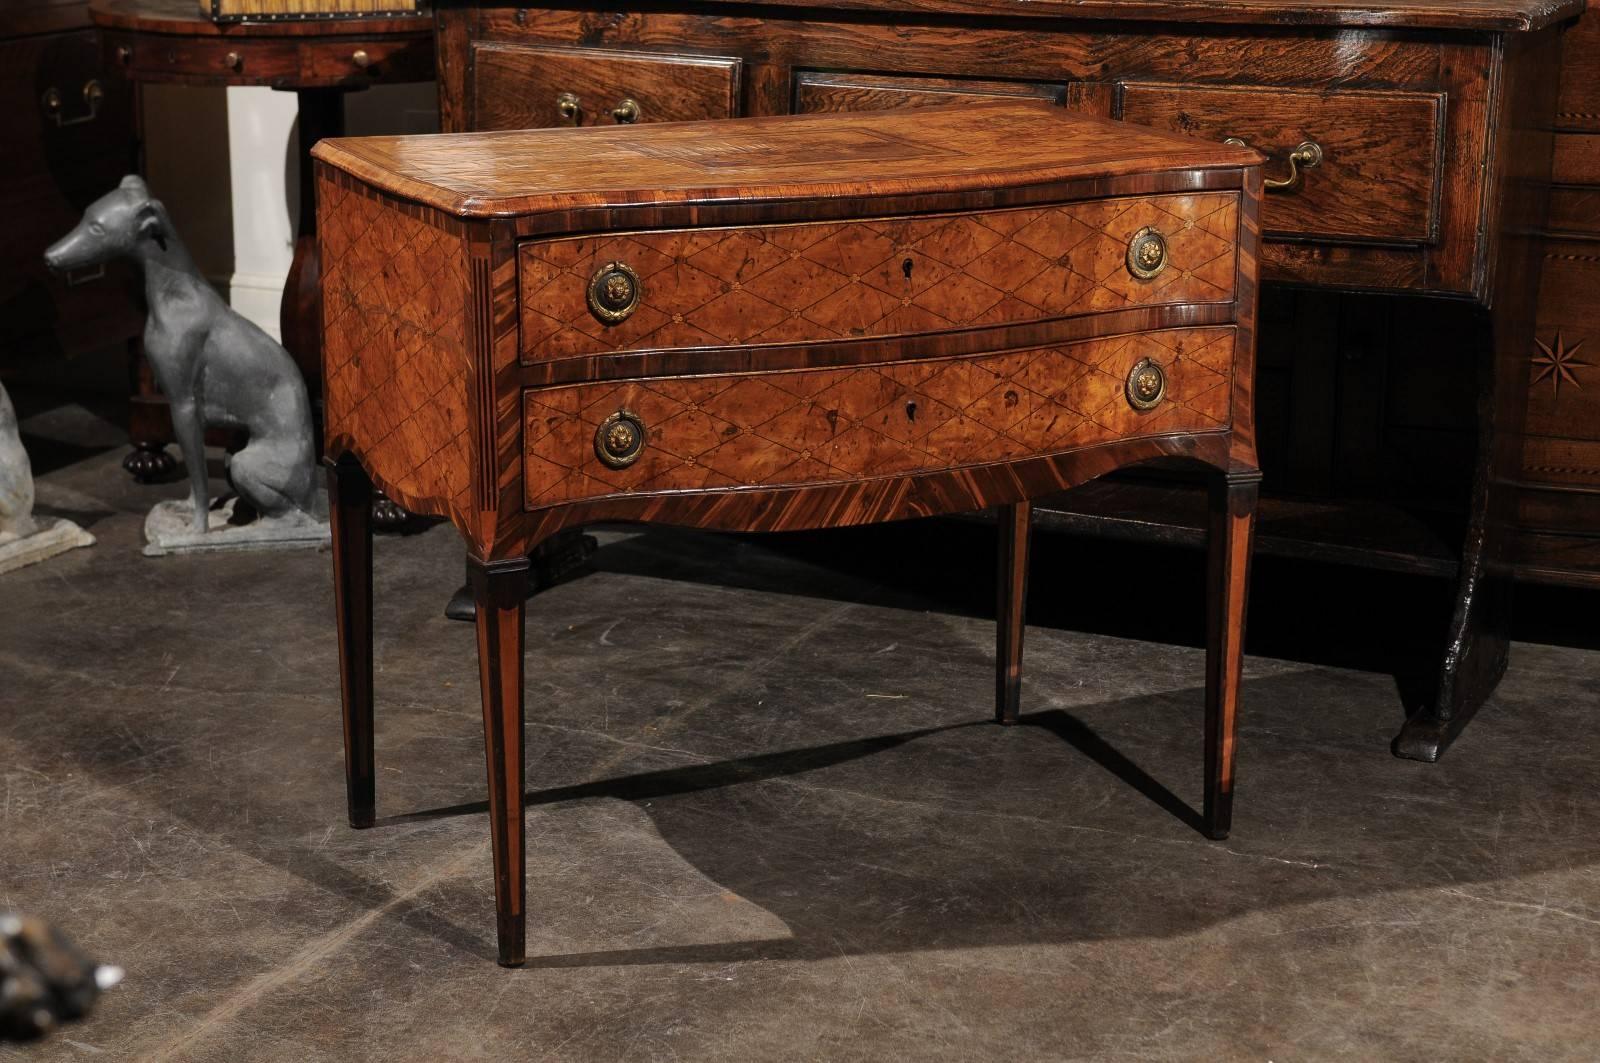 This Italian 18th century chest features an exquisite top adorned with a diamond pattern veneer, around a central landscape scene in marquetry. The horizontal diamond pattern is repeated on both the sides and the front. Two delicate drawers fill the